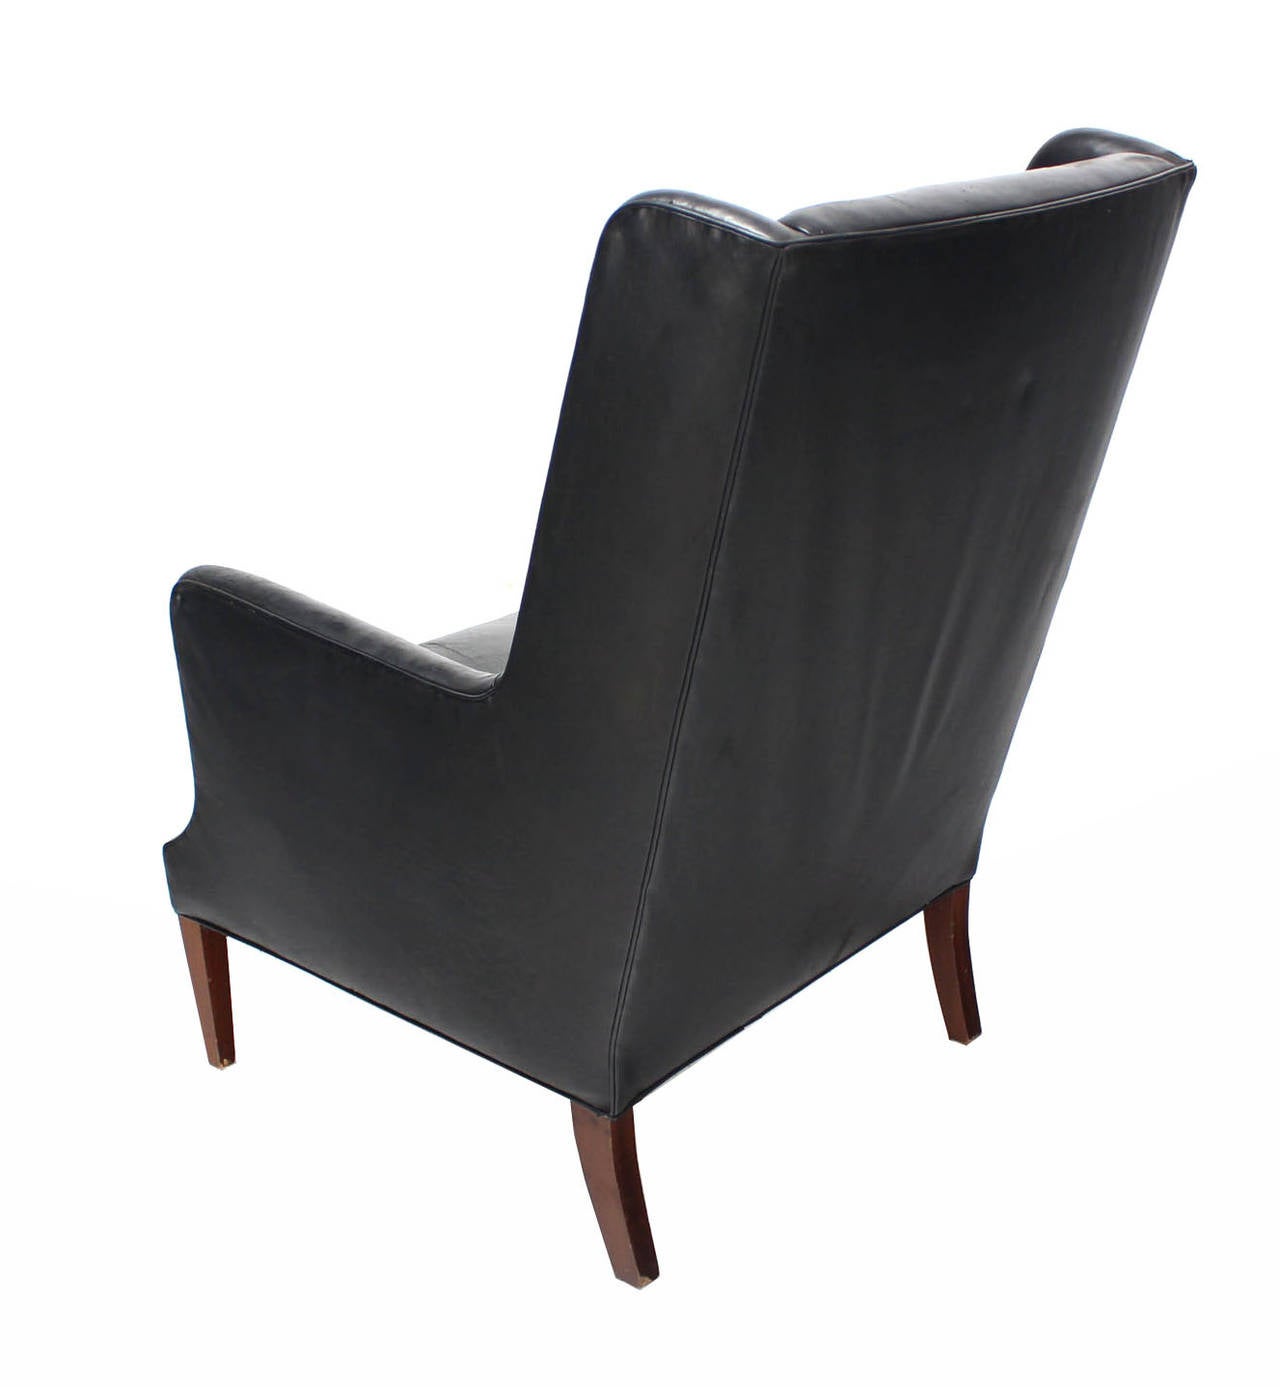 20th Century Pair of Black Upholstered Leather Chairs